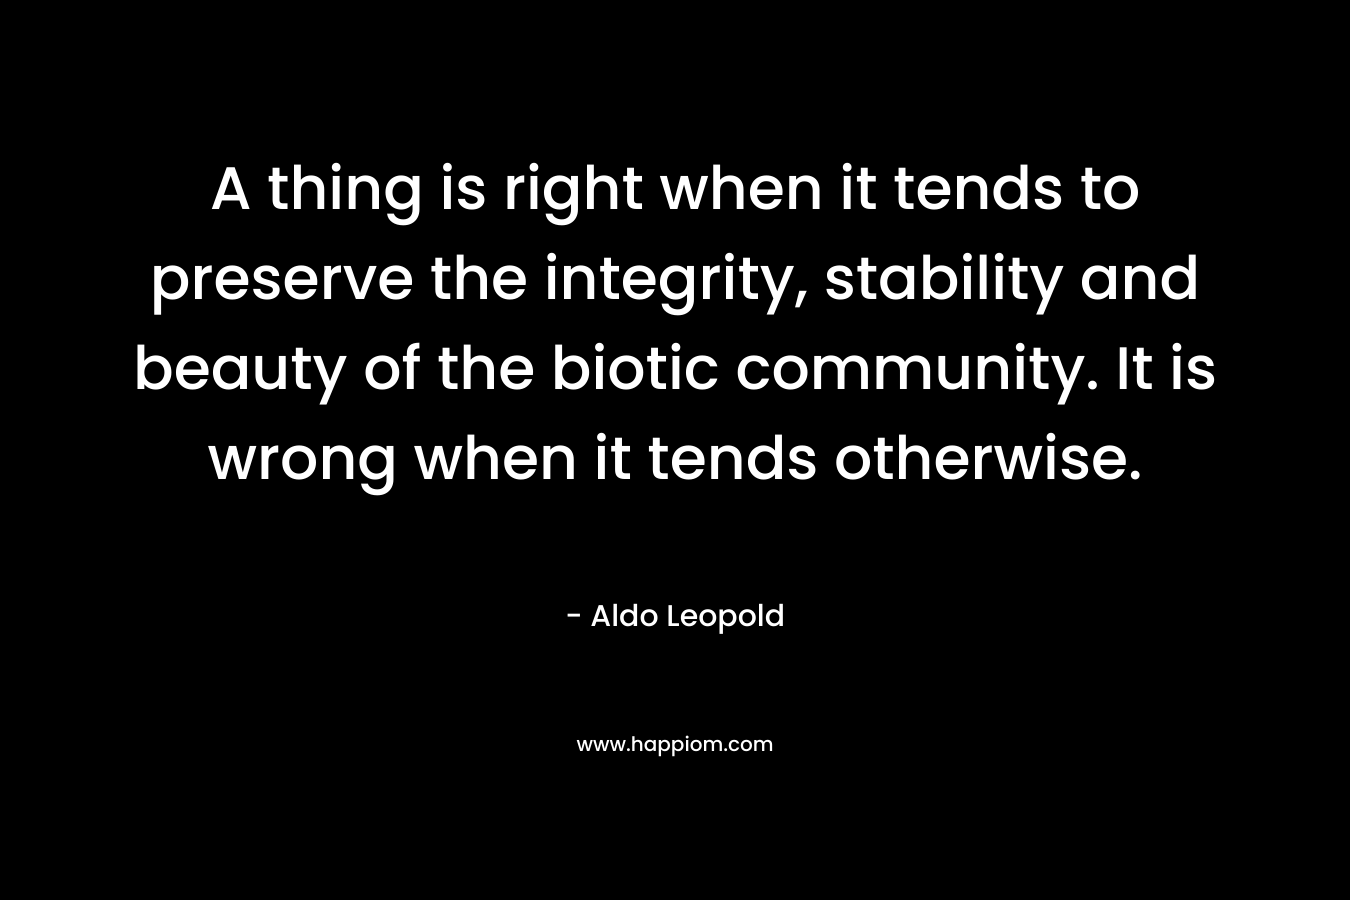 A thing is right when it tends to preserve the integrity, stability and beauty of the biotic community. It is wrong when it tends otherwise. – Aldo Leopold